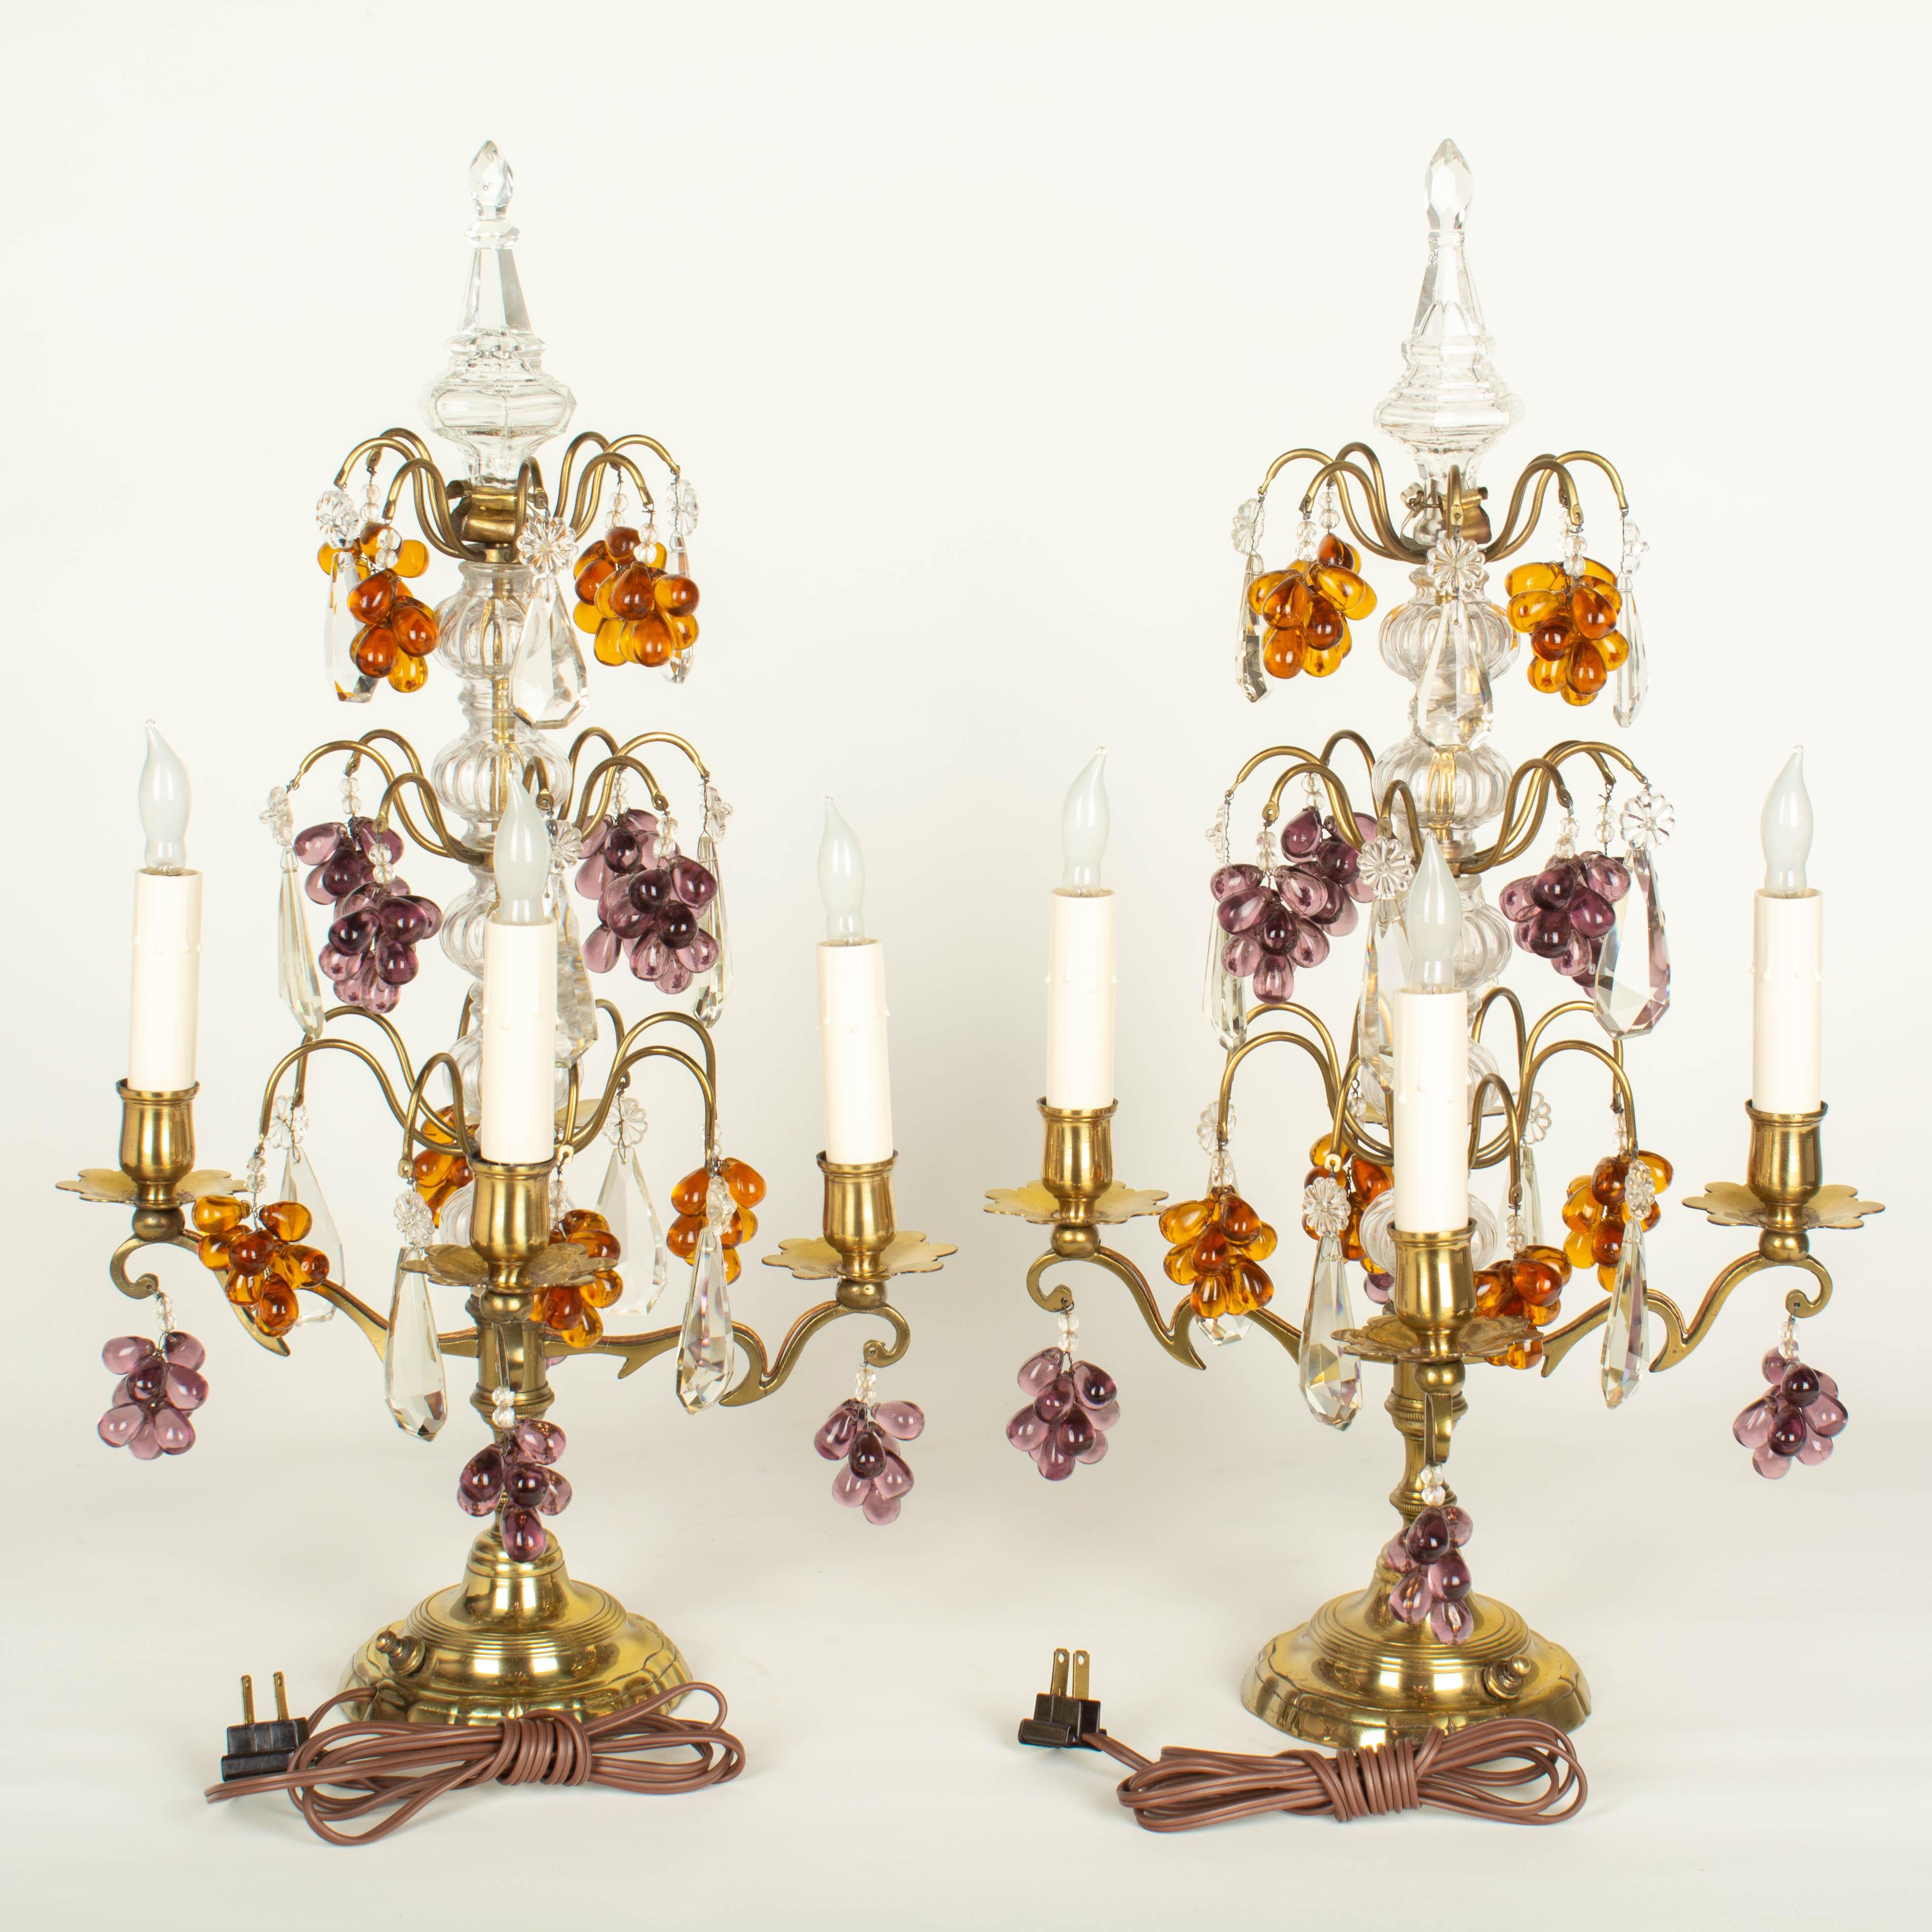 Cast French Crystal Girandoles with Grape Clusters